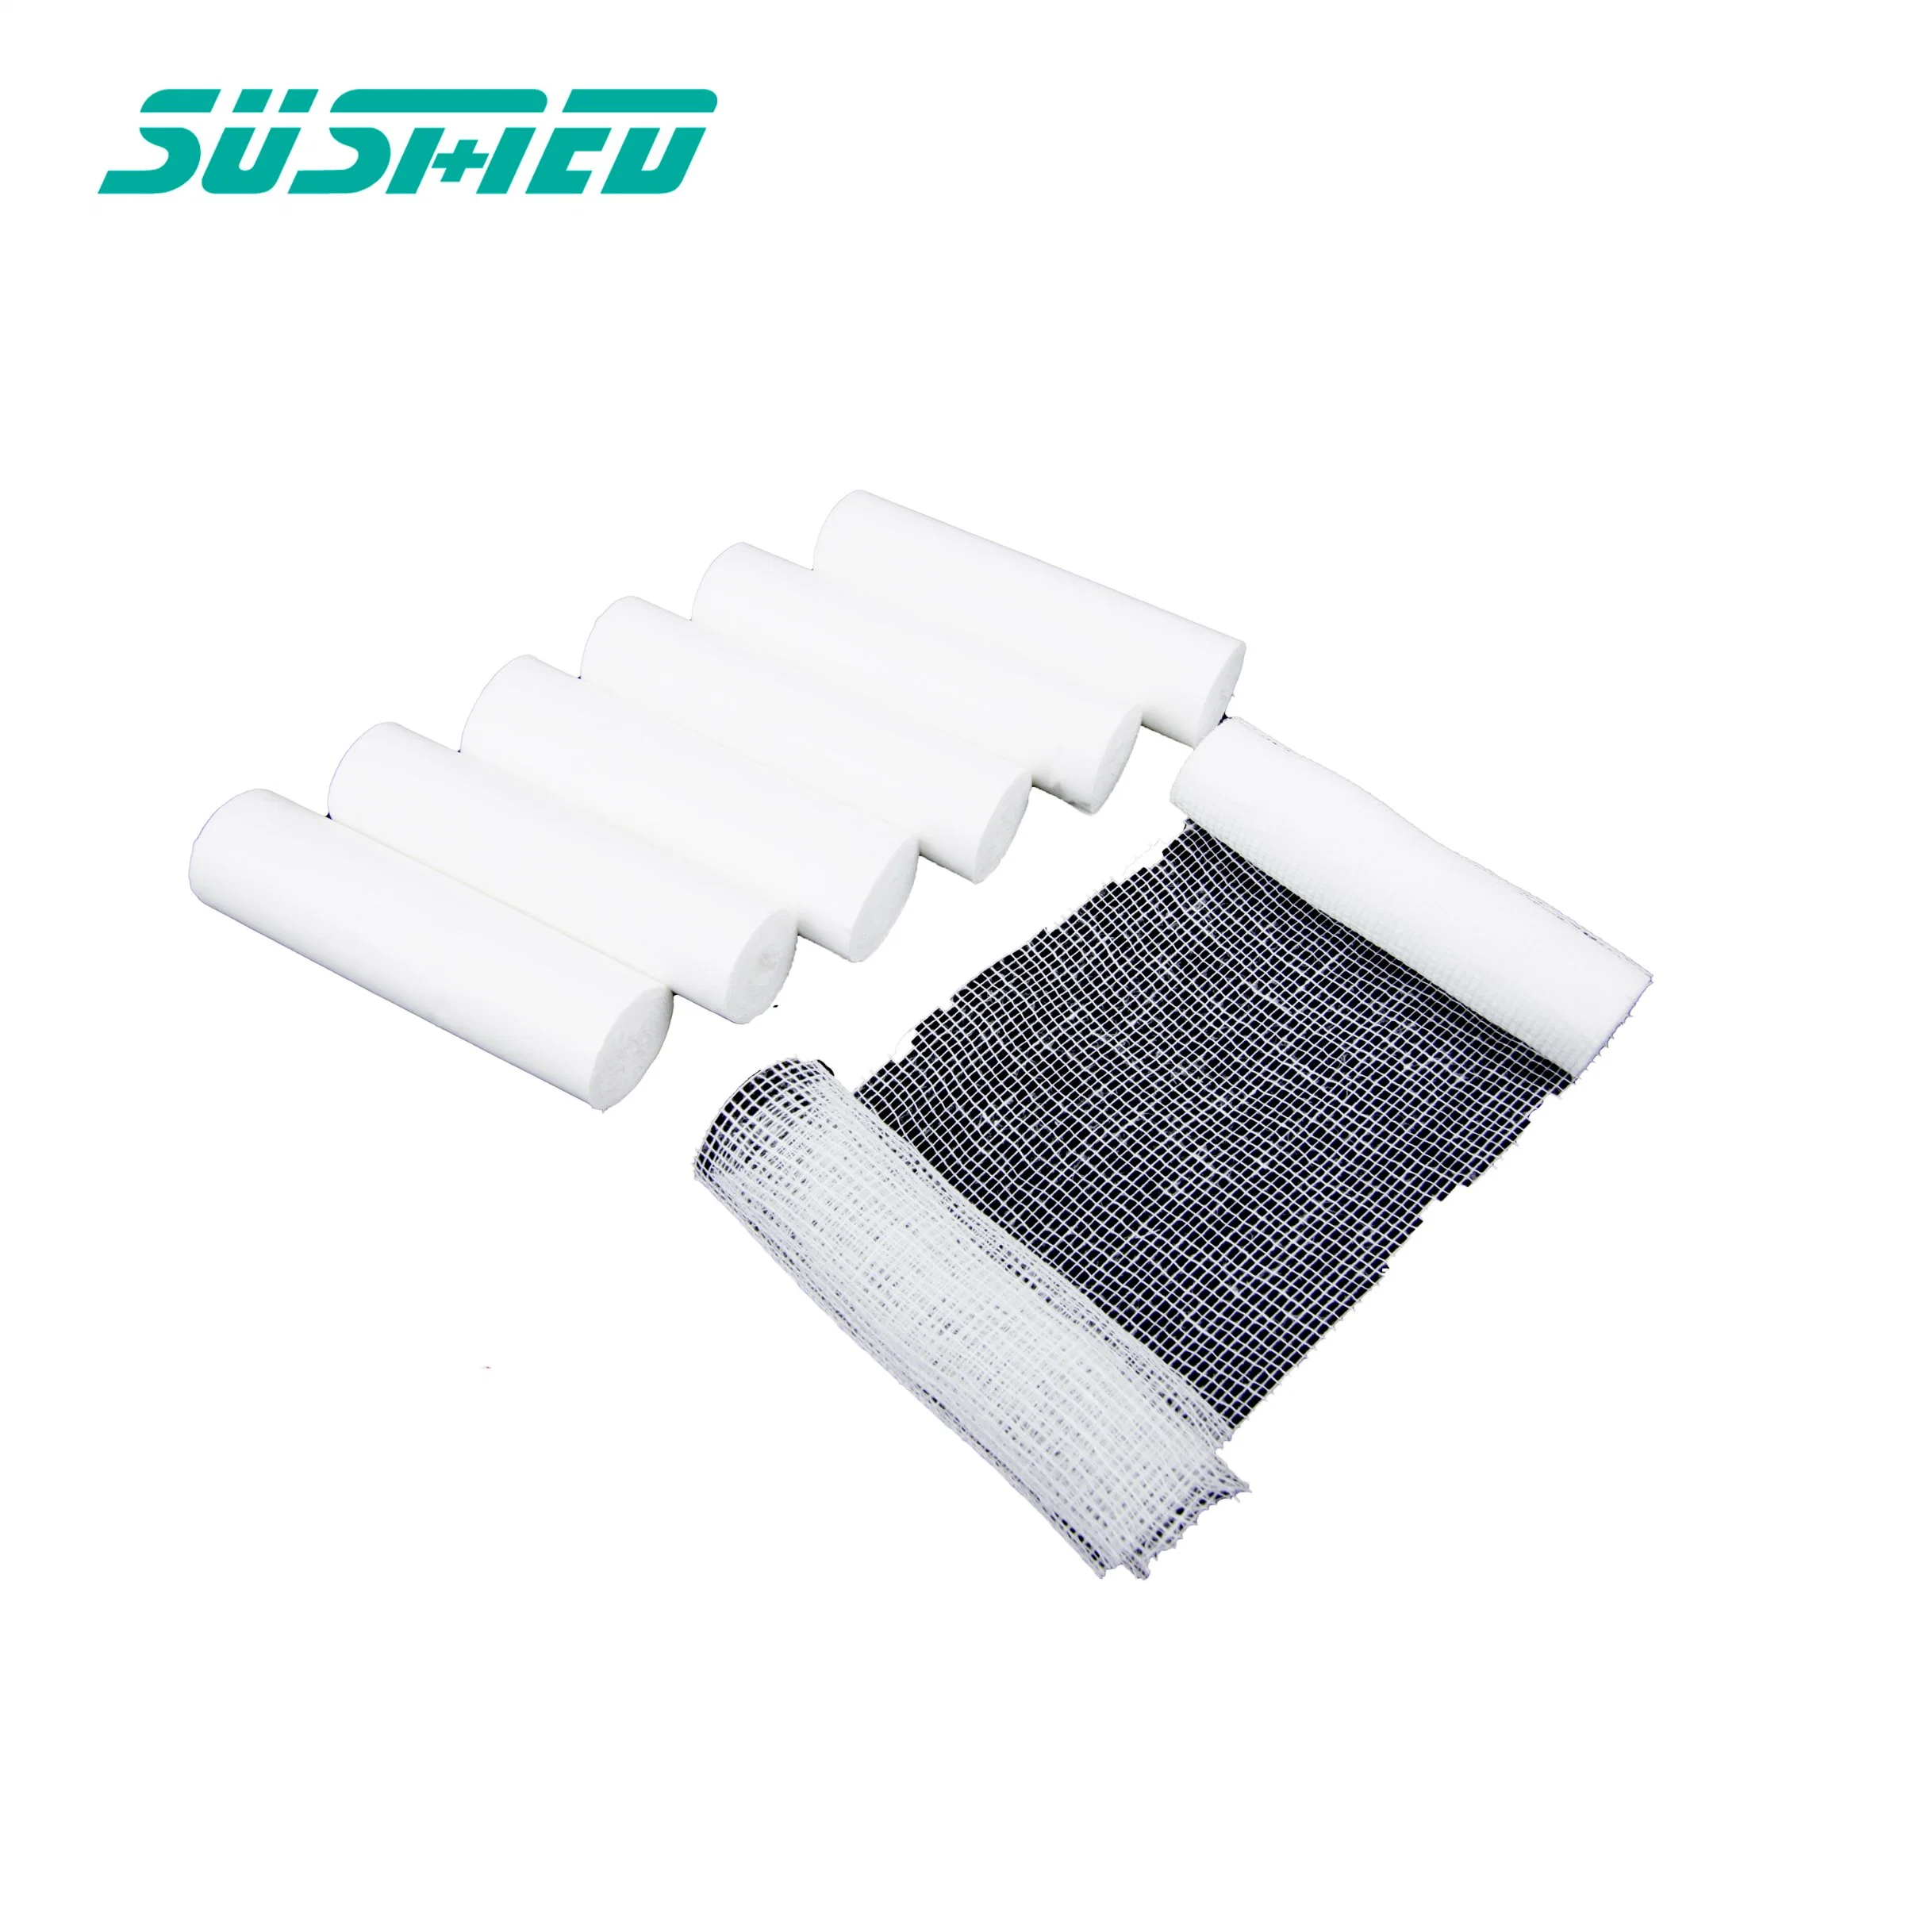 Hospital Medical Cotton Surgical Absorbent Gauze Roll